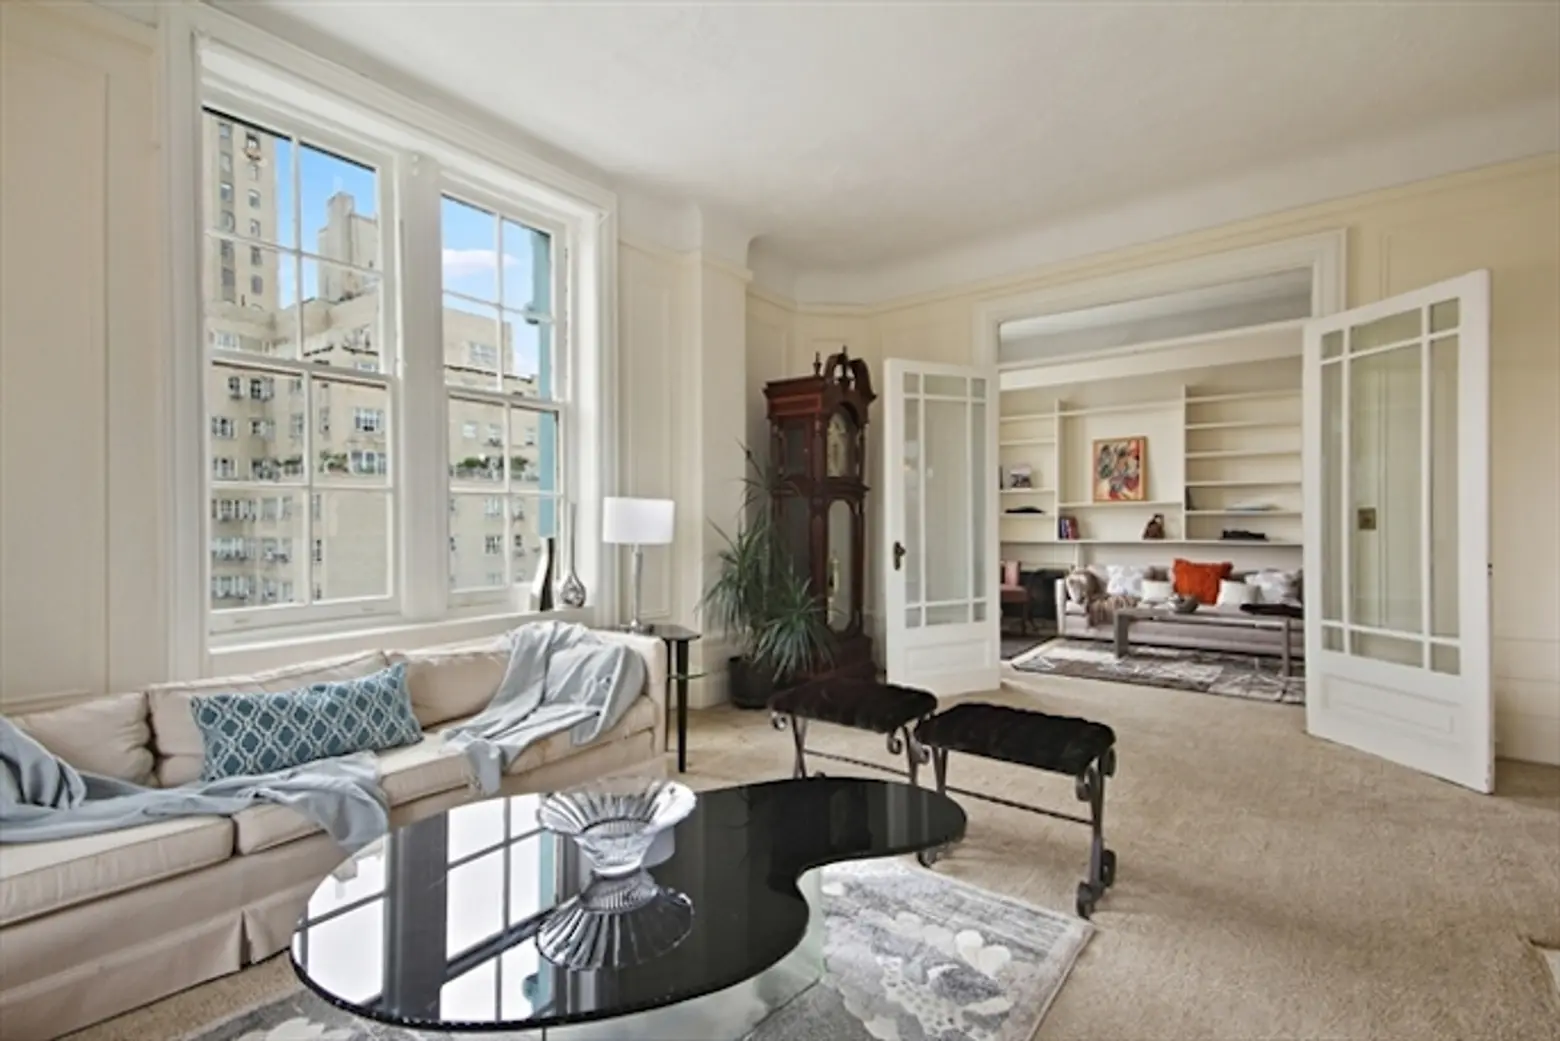 285 Central Park West, St. Urban, living room, country chic, country and city, new york interiors, million dollar listing